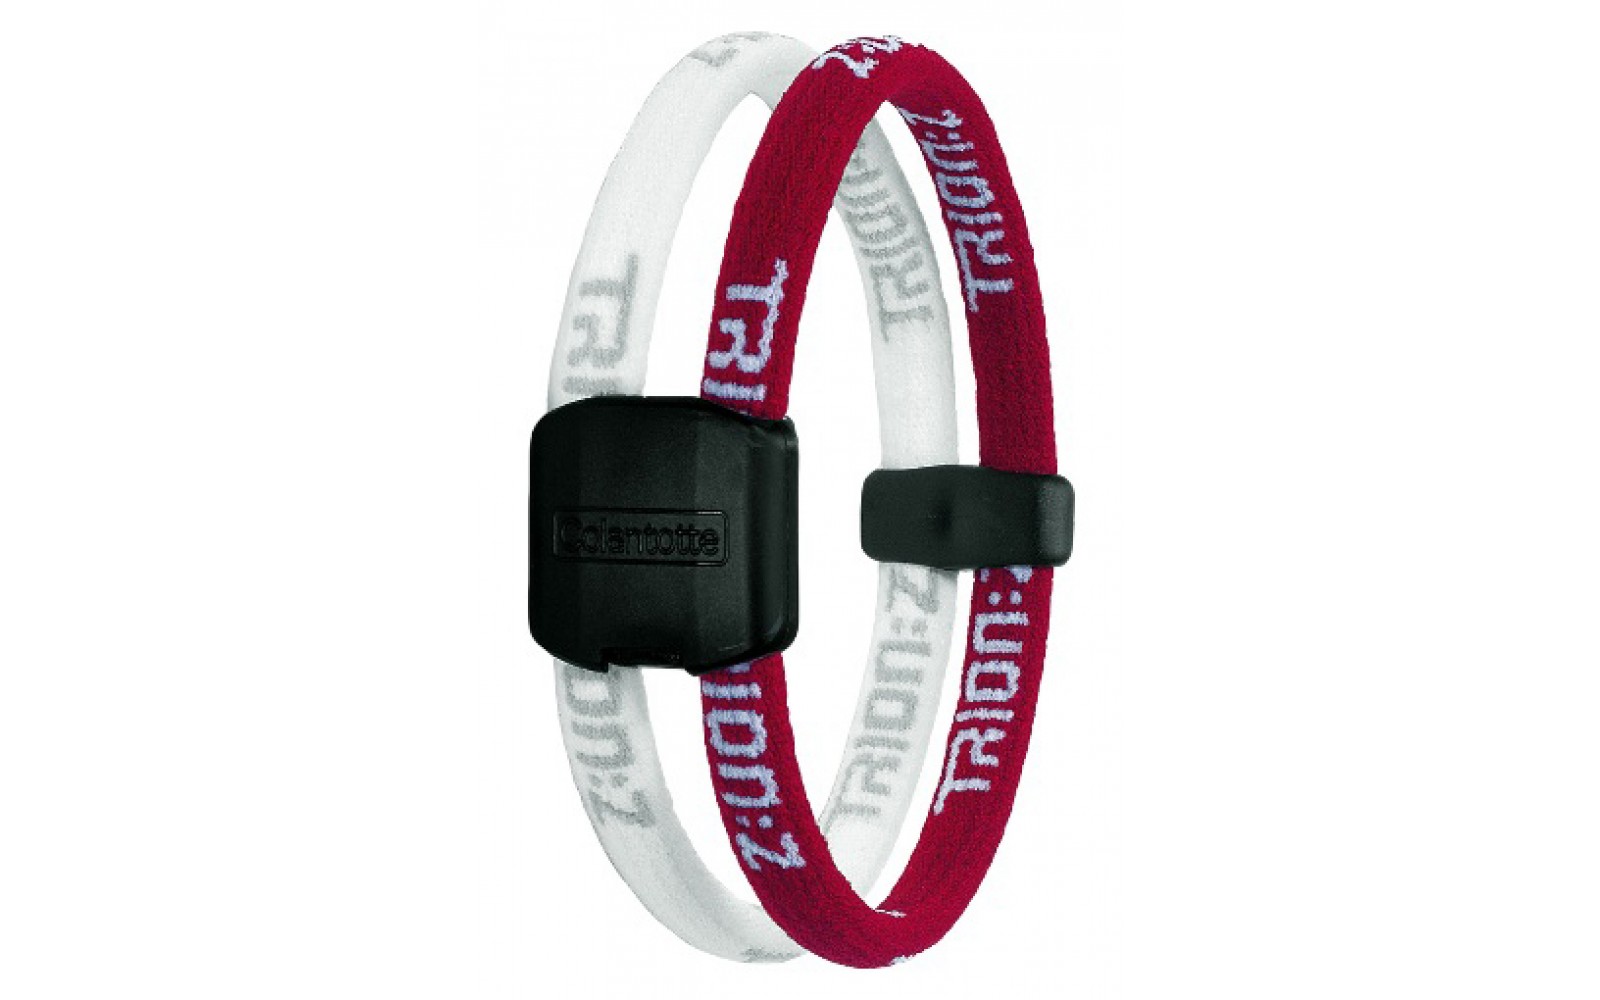 Trion:Z Magneet Armband Kleur : Rood/Wit Maat : Small